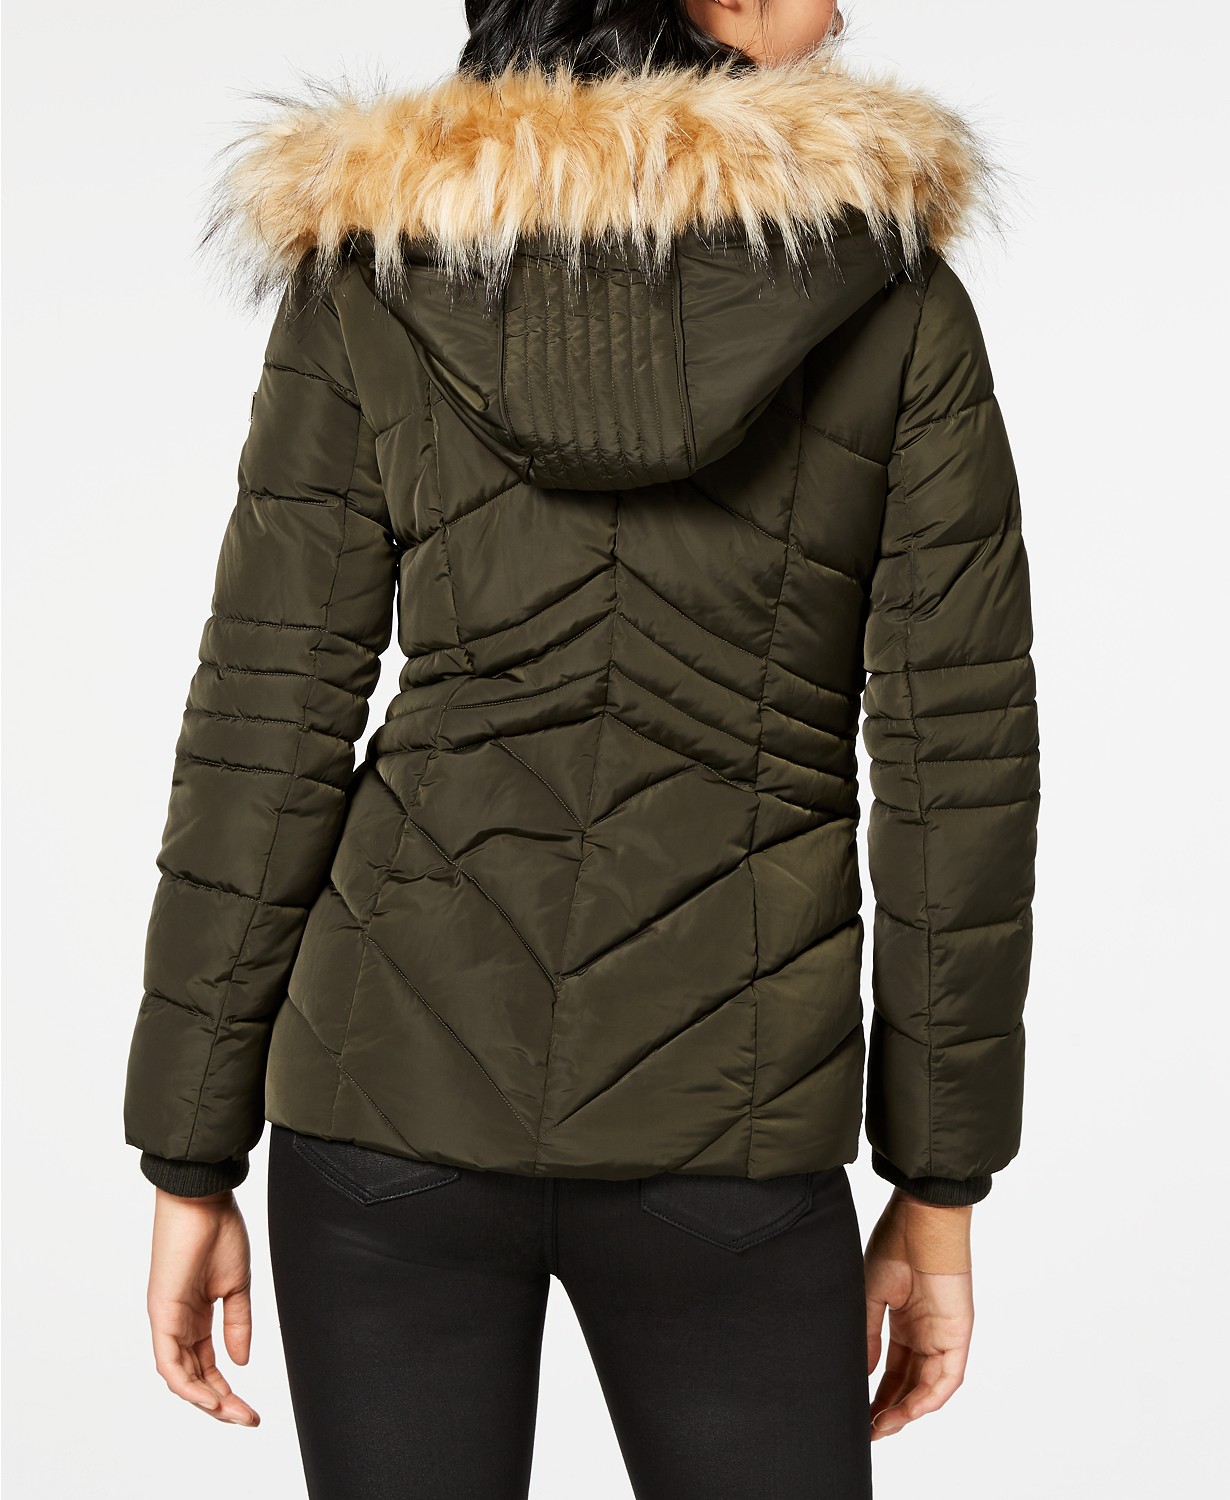 www.couturepoint.com-guess-womens-green-faux-fur-trim-hooded-puffer-jacket-coat